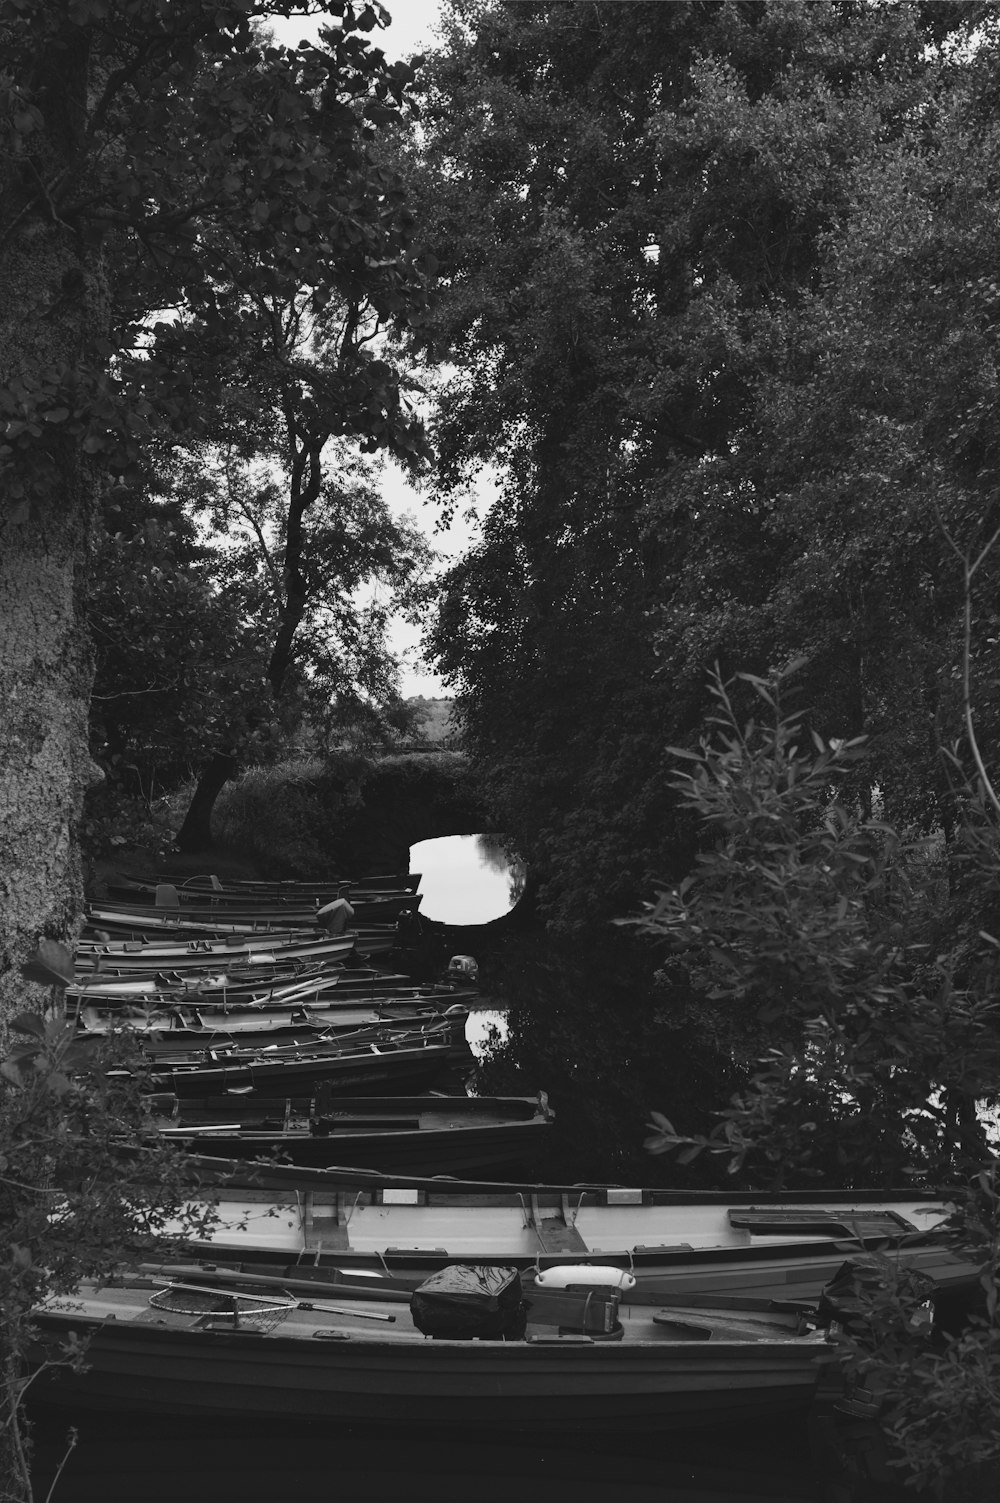 a black and white photo of a row of boats